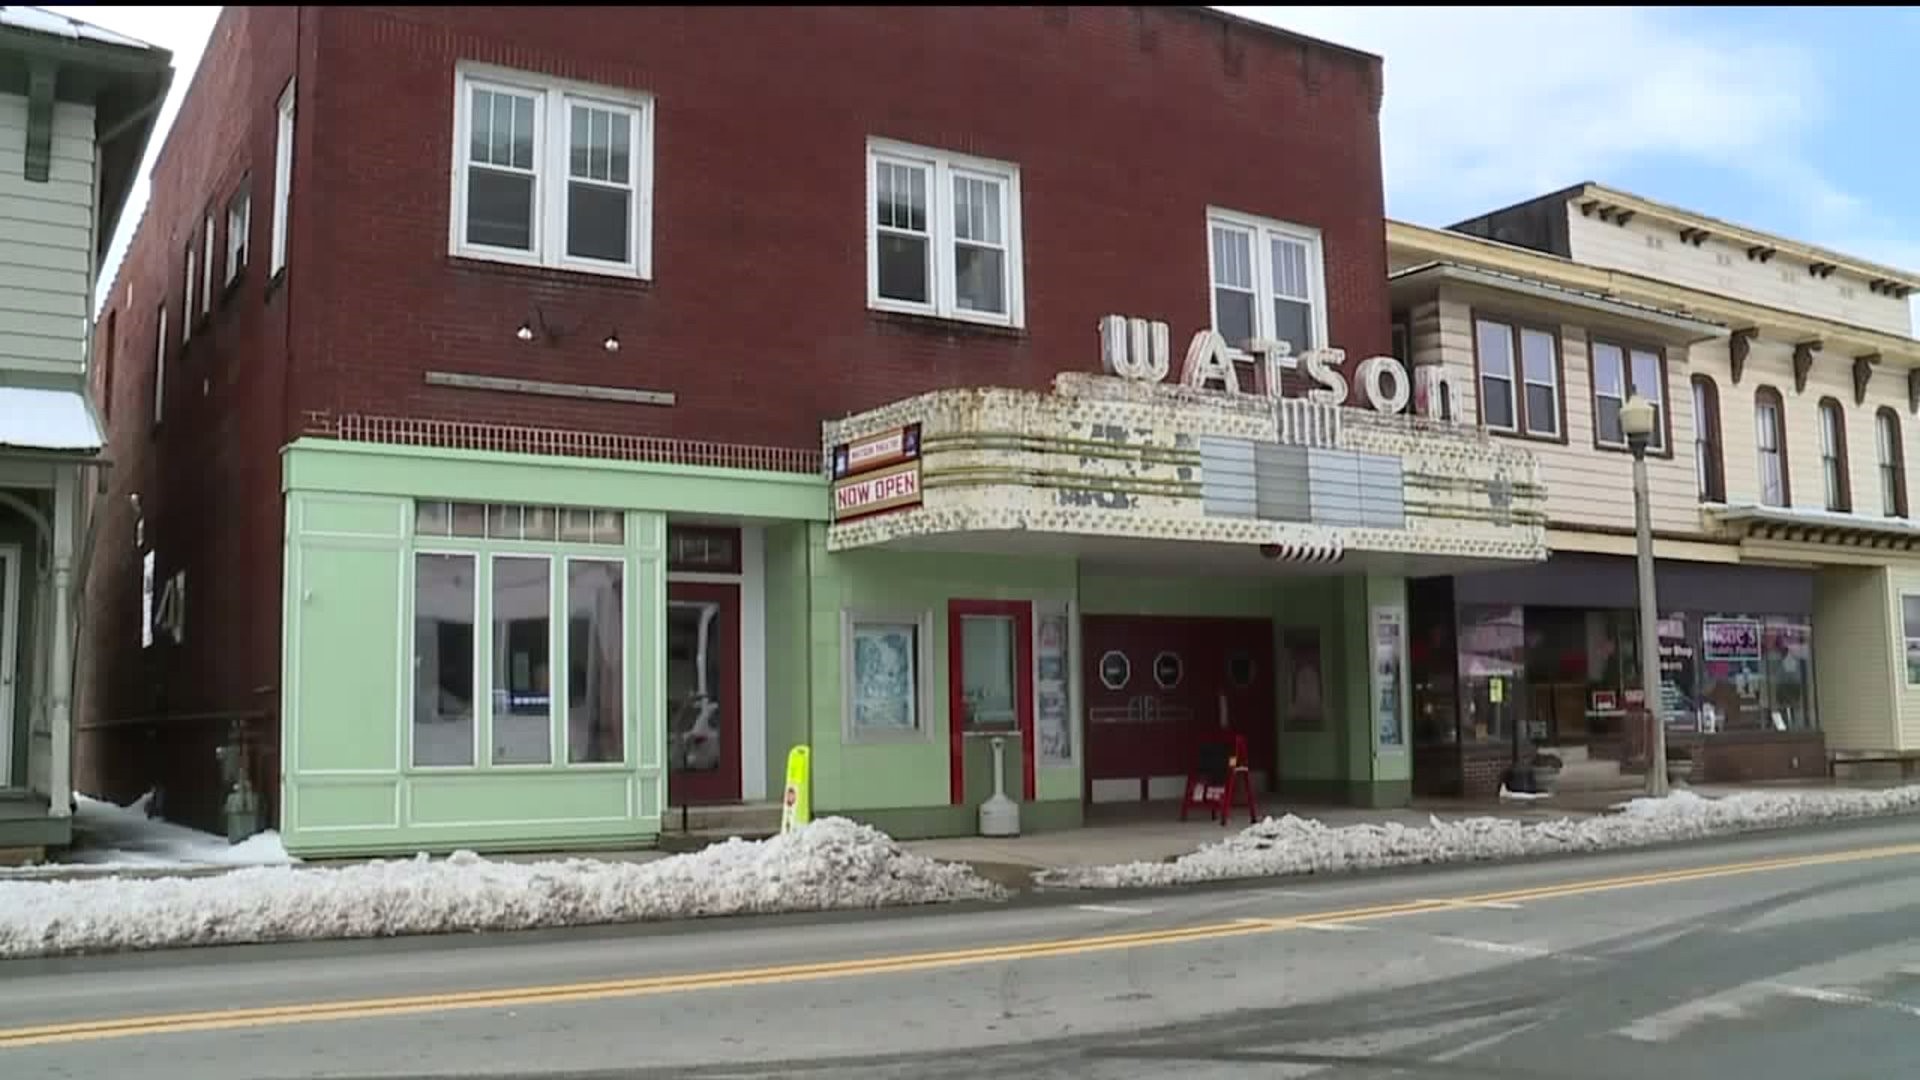 Restaurant Replaces Former Movie Theater in Watsontown